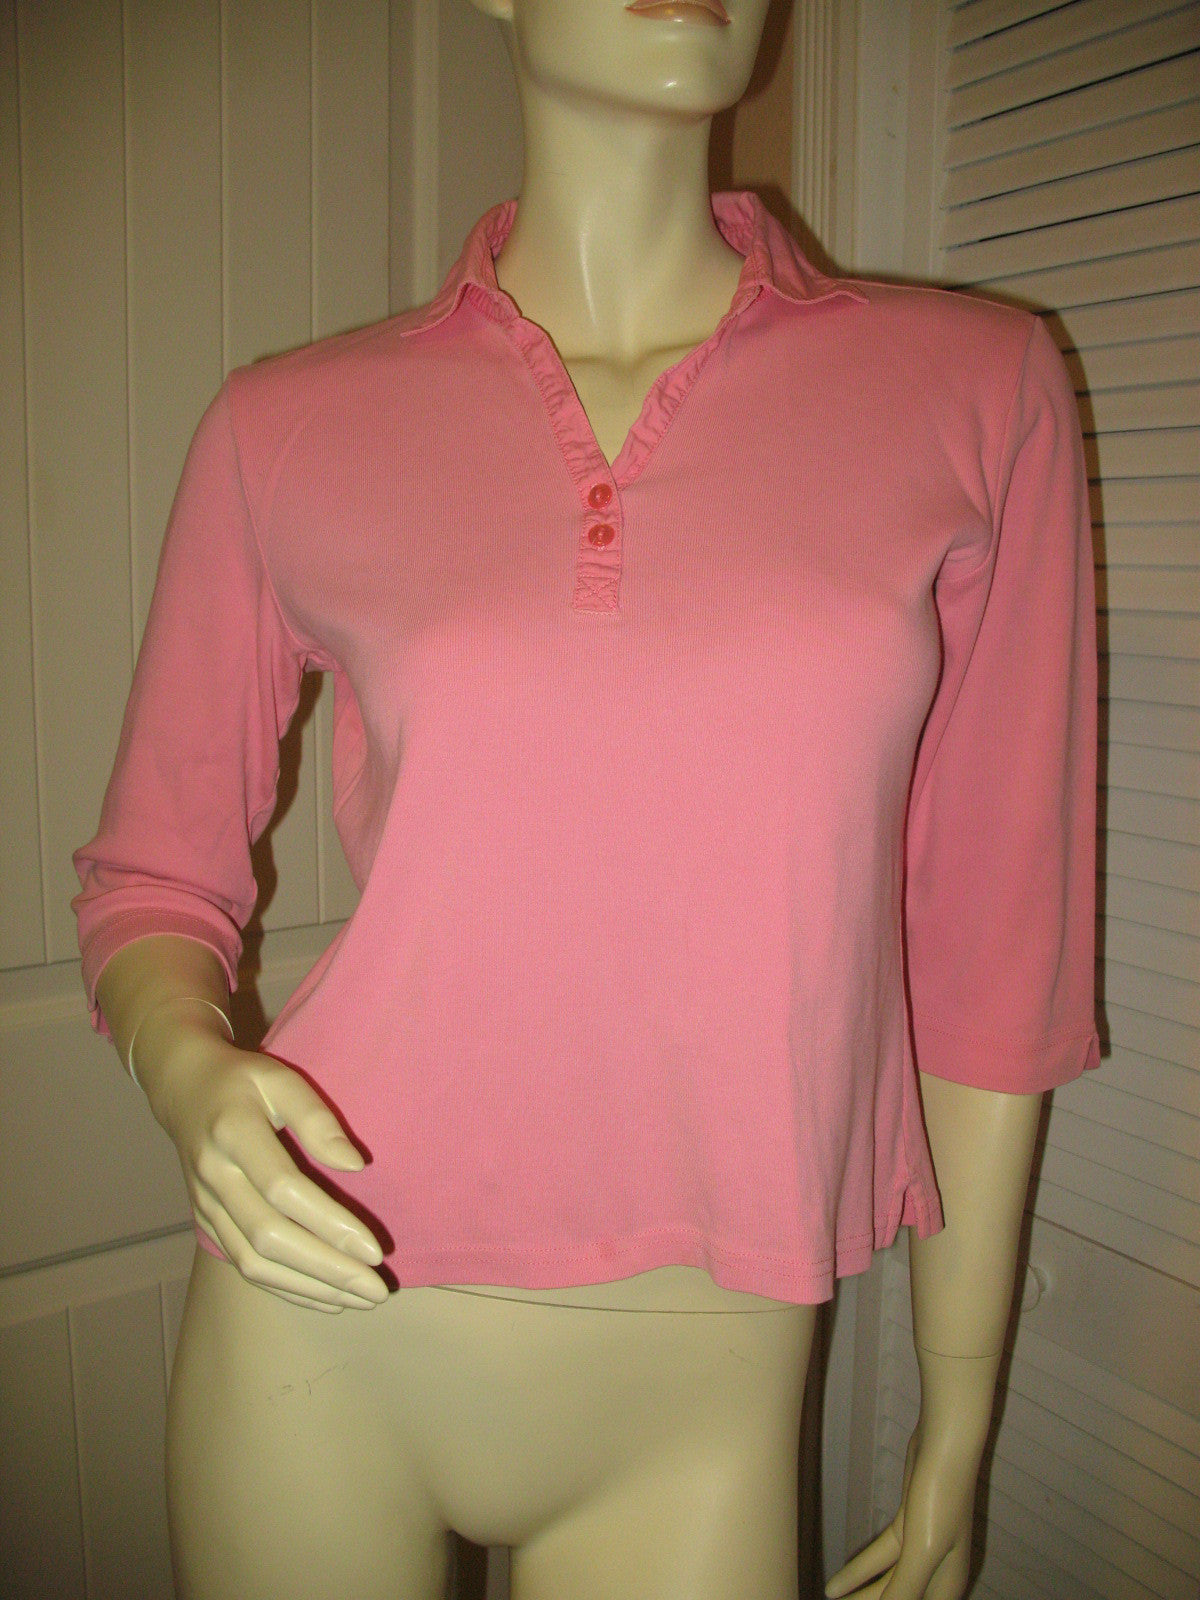 Womens Tops TALBOTS PINK 3/4 Sleeve Collar COTTON TOP